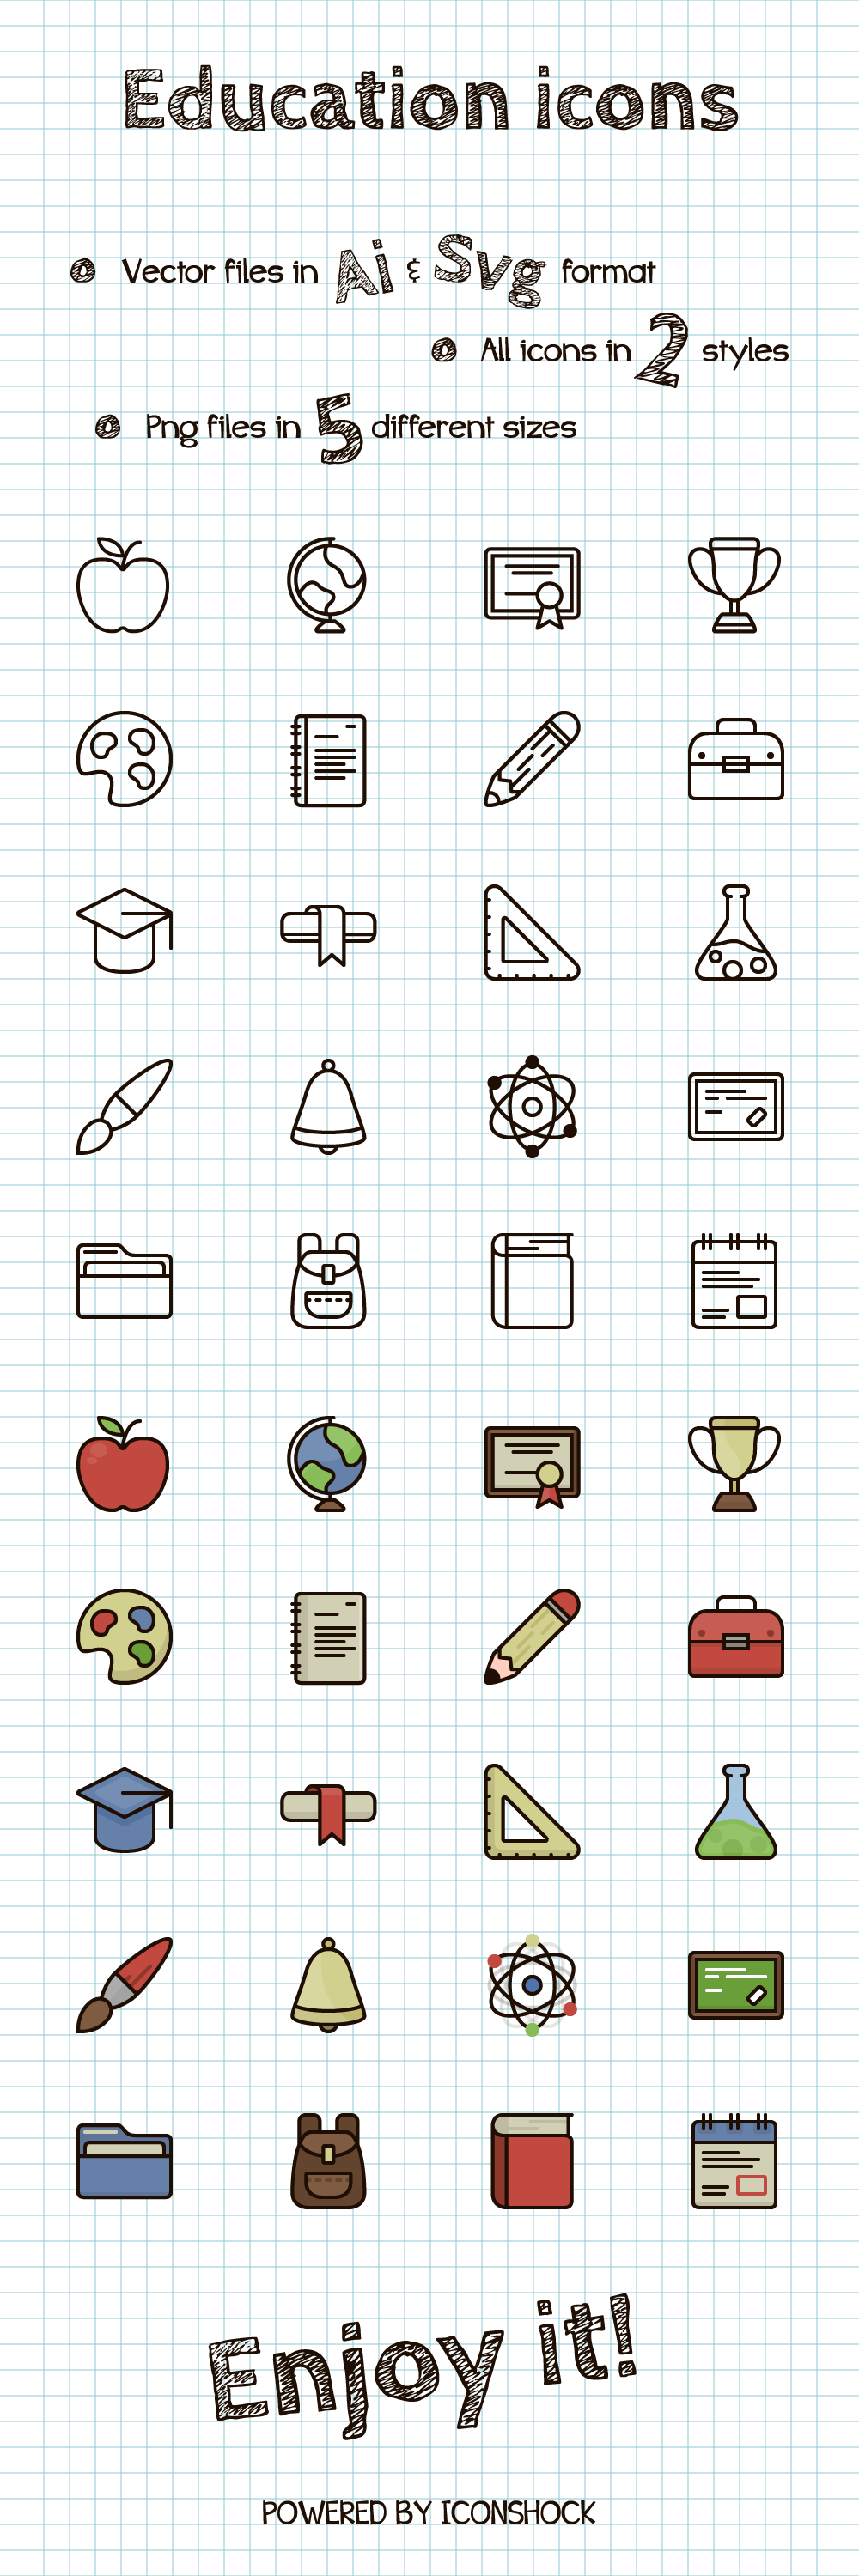 Free Vector Education Icons